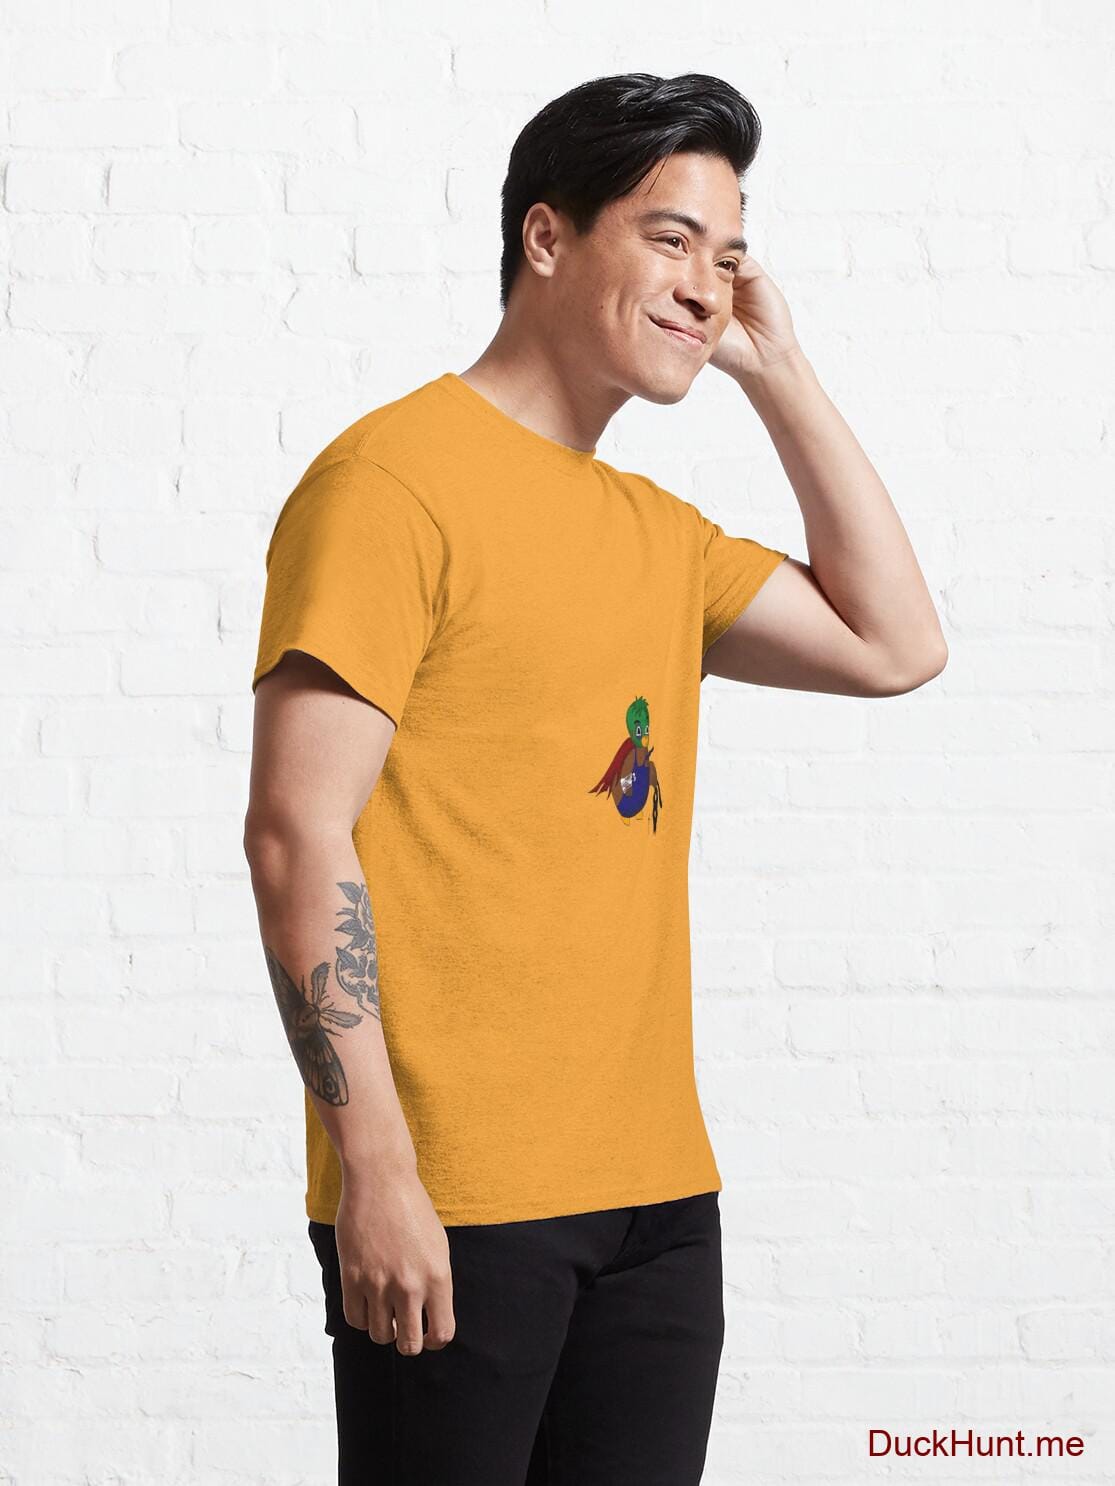 Dead DuckHunt Boss (smokeless) Gold Classic T-Shirt (Front printed) alternative image 4